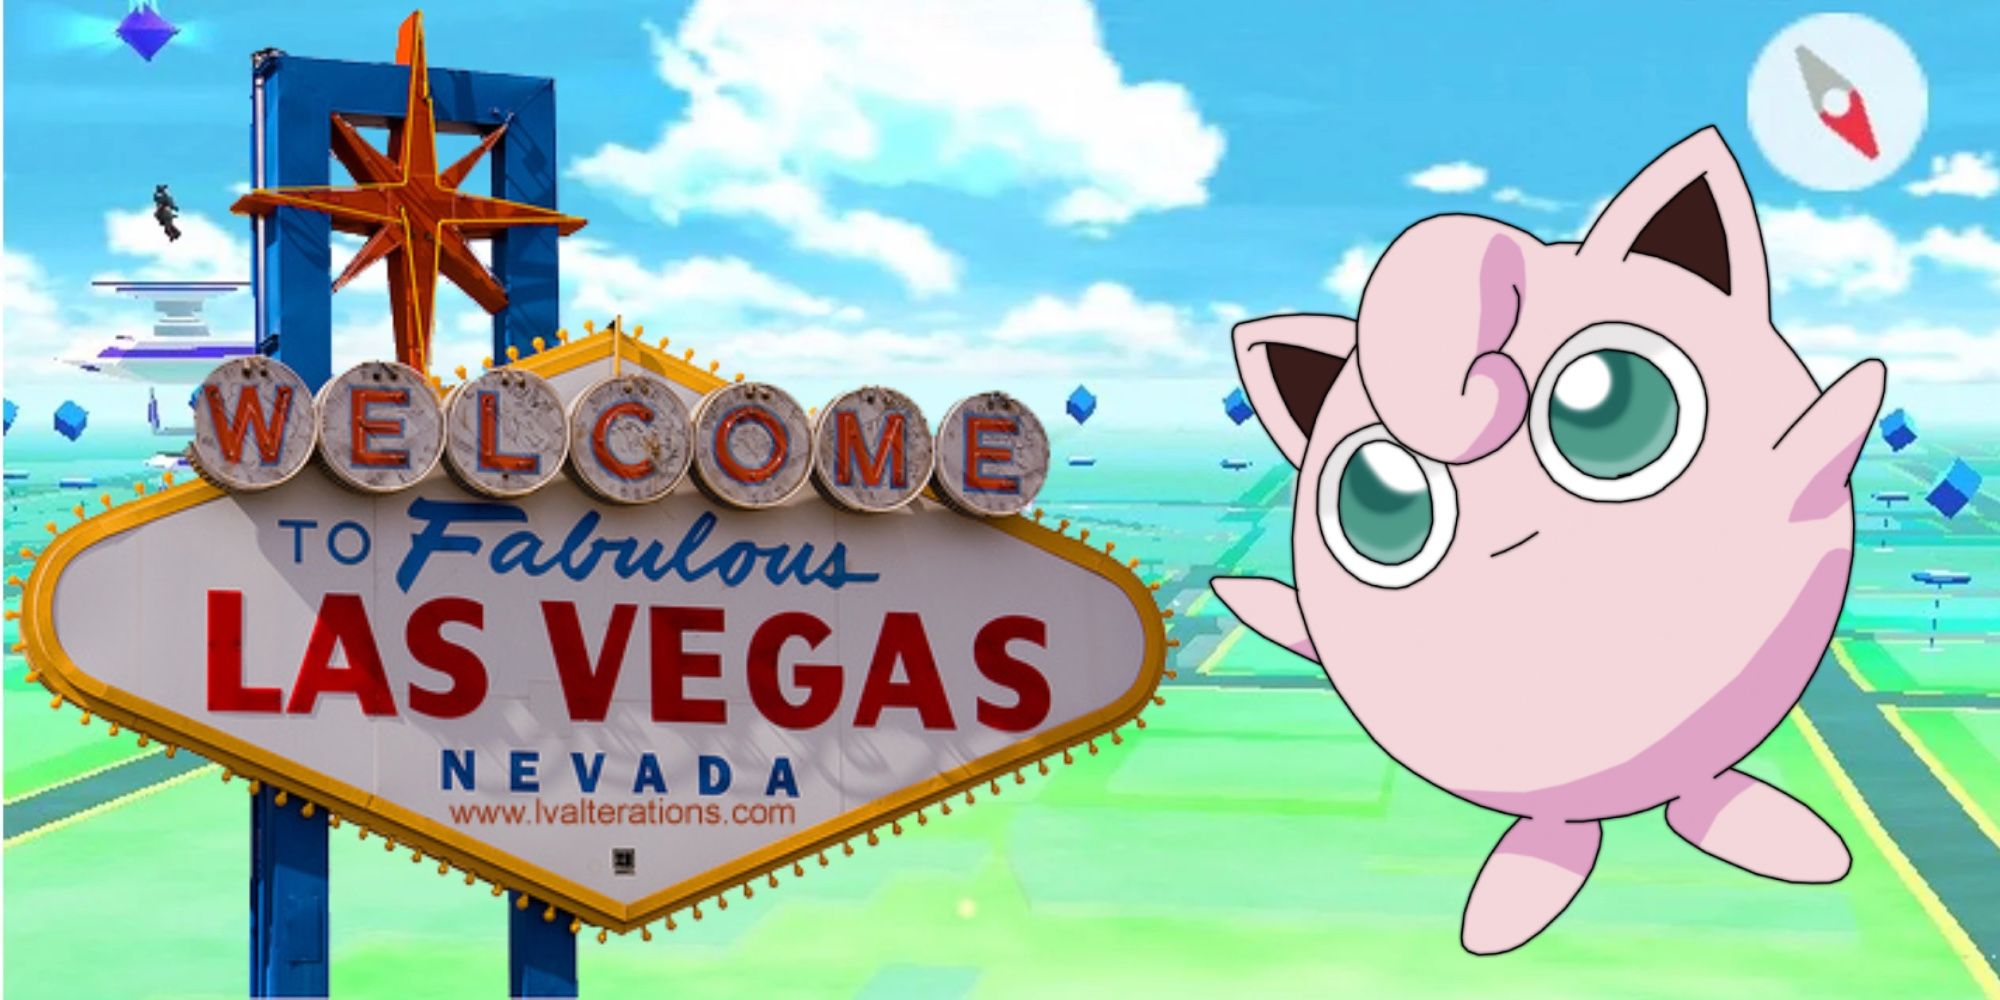 Pokemon Themed Streets Open In Vegas, "Squirtle Lane" And "Jigglypuff